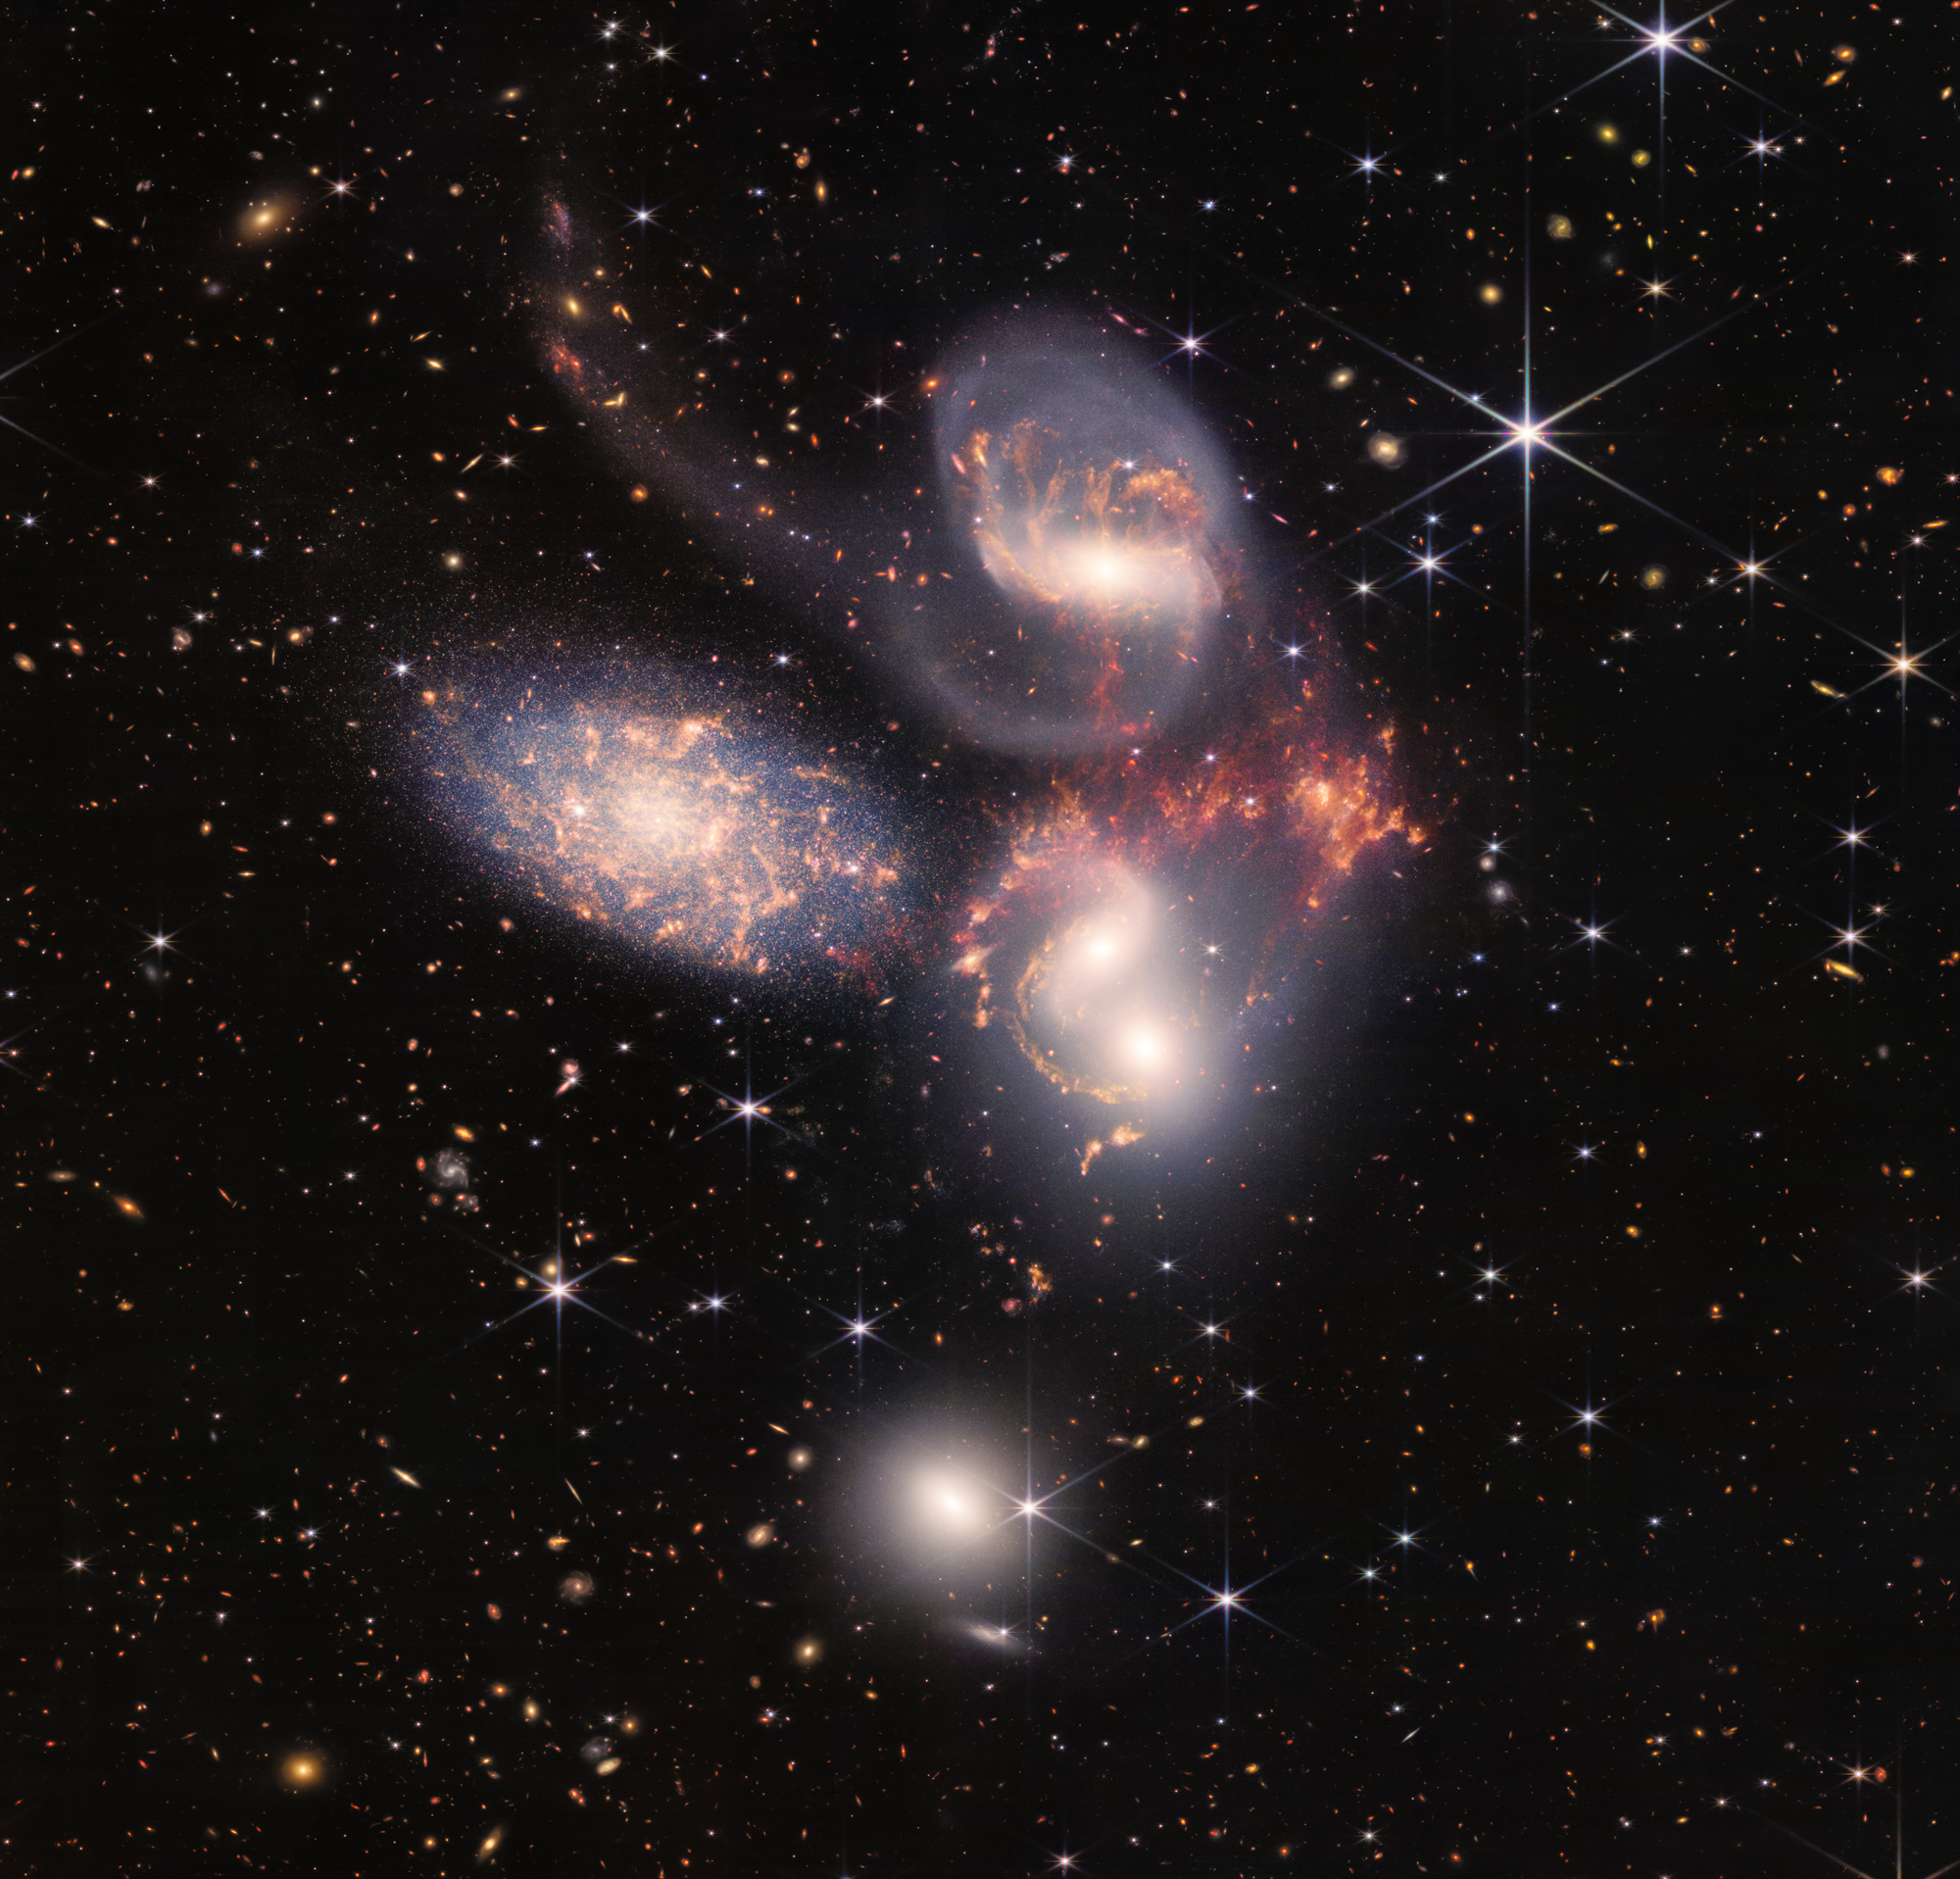 Image of a group of five galaxies that appear close to each other in the sky: two in the middle, one toward the top, one to the upper left, and one toward the bottom. Four of the five appear to be touching. One is somewhat separated. In the image, the galaxies are large relative to the hundreds of much smaller (more distant) galaxies in the background. All five galaxies have bright white cores. Each has a slightly different size, shape, structure, and coloring. Scattered across the image, in front of the galaxies are number of foreground stars with diffraction spikes: bright white points, each with eight bright lines radiating out from the center.